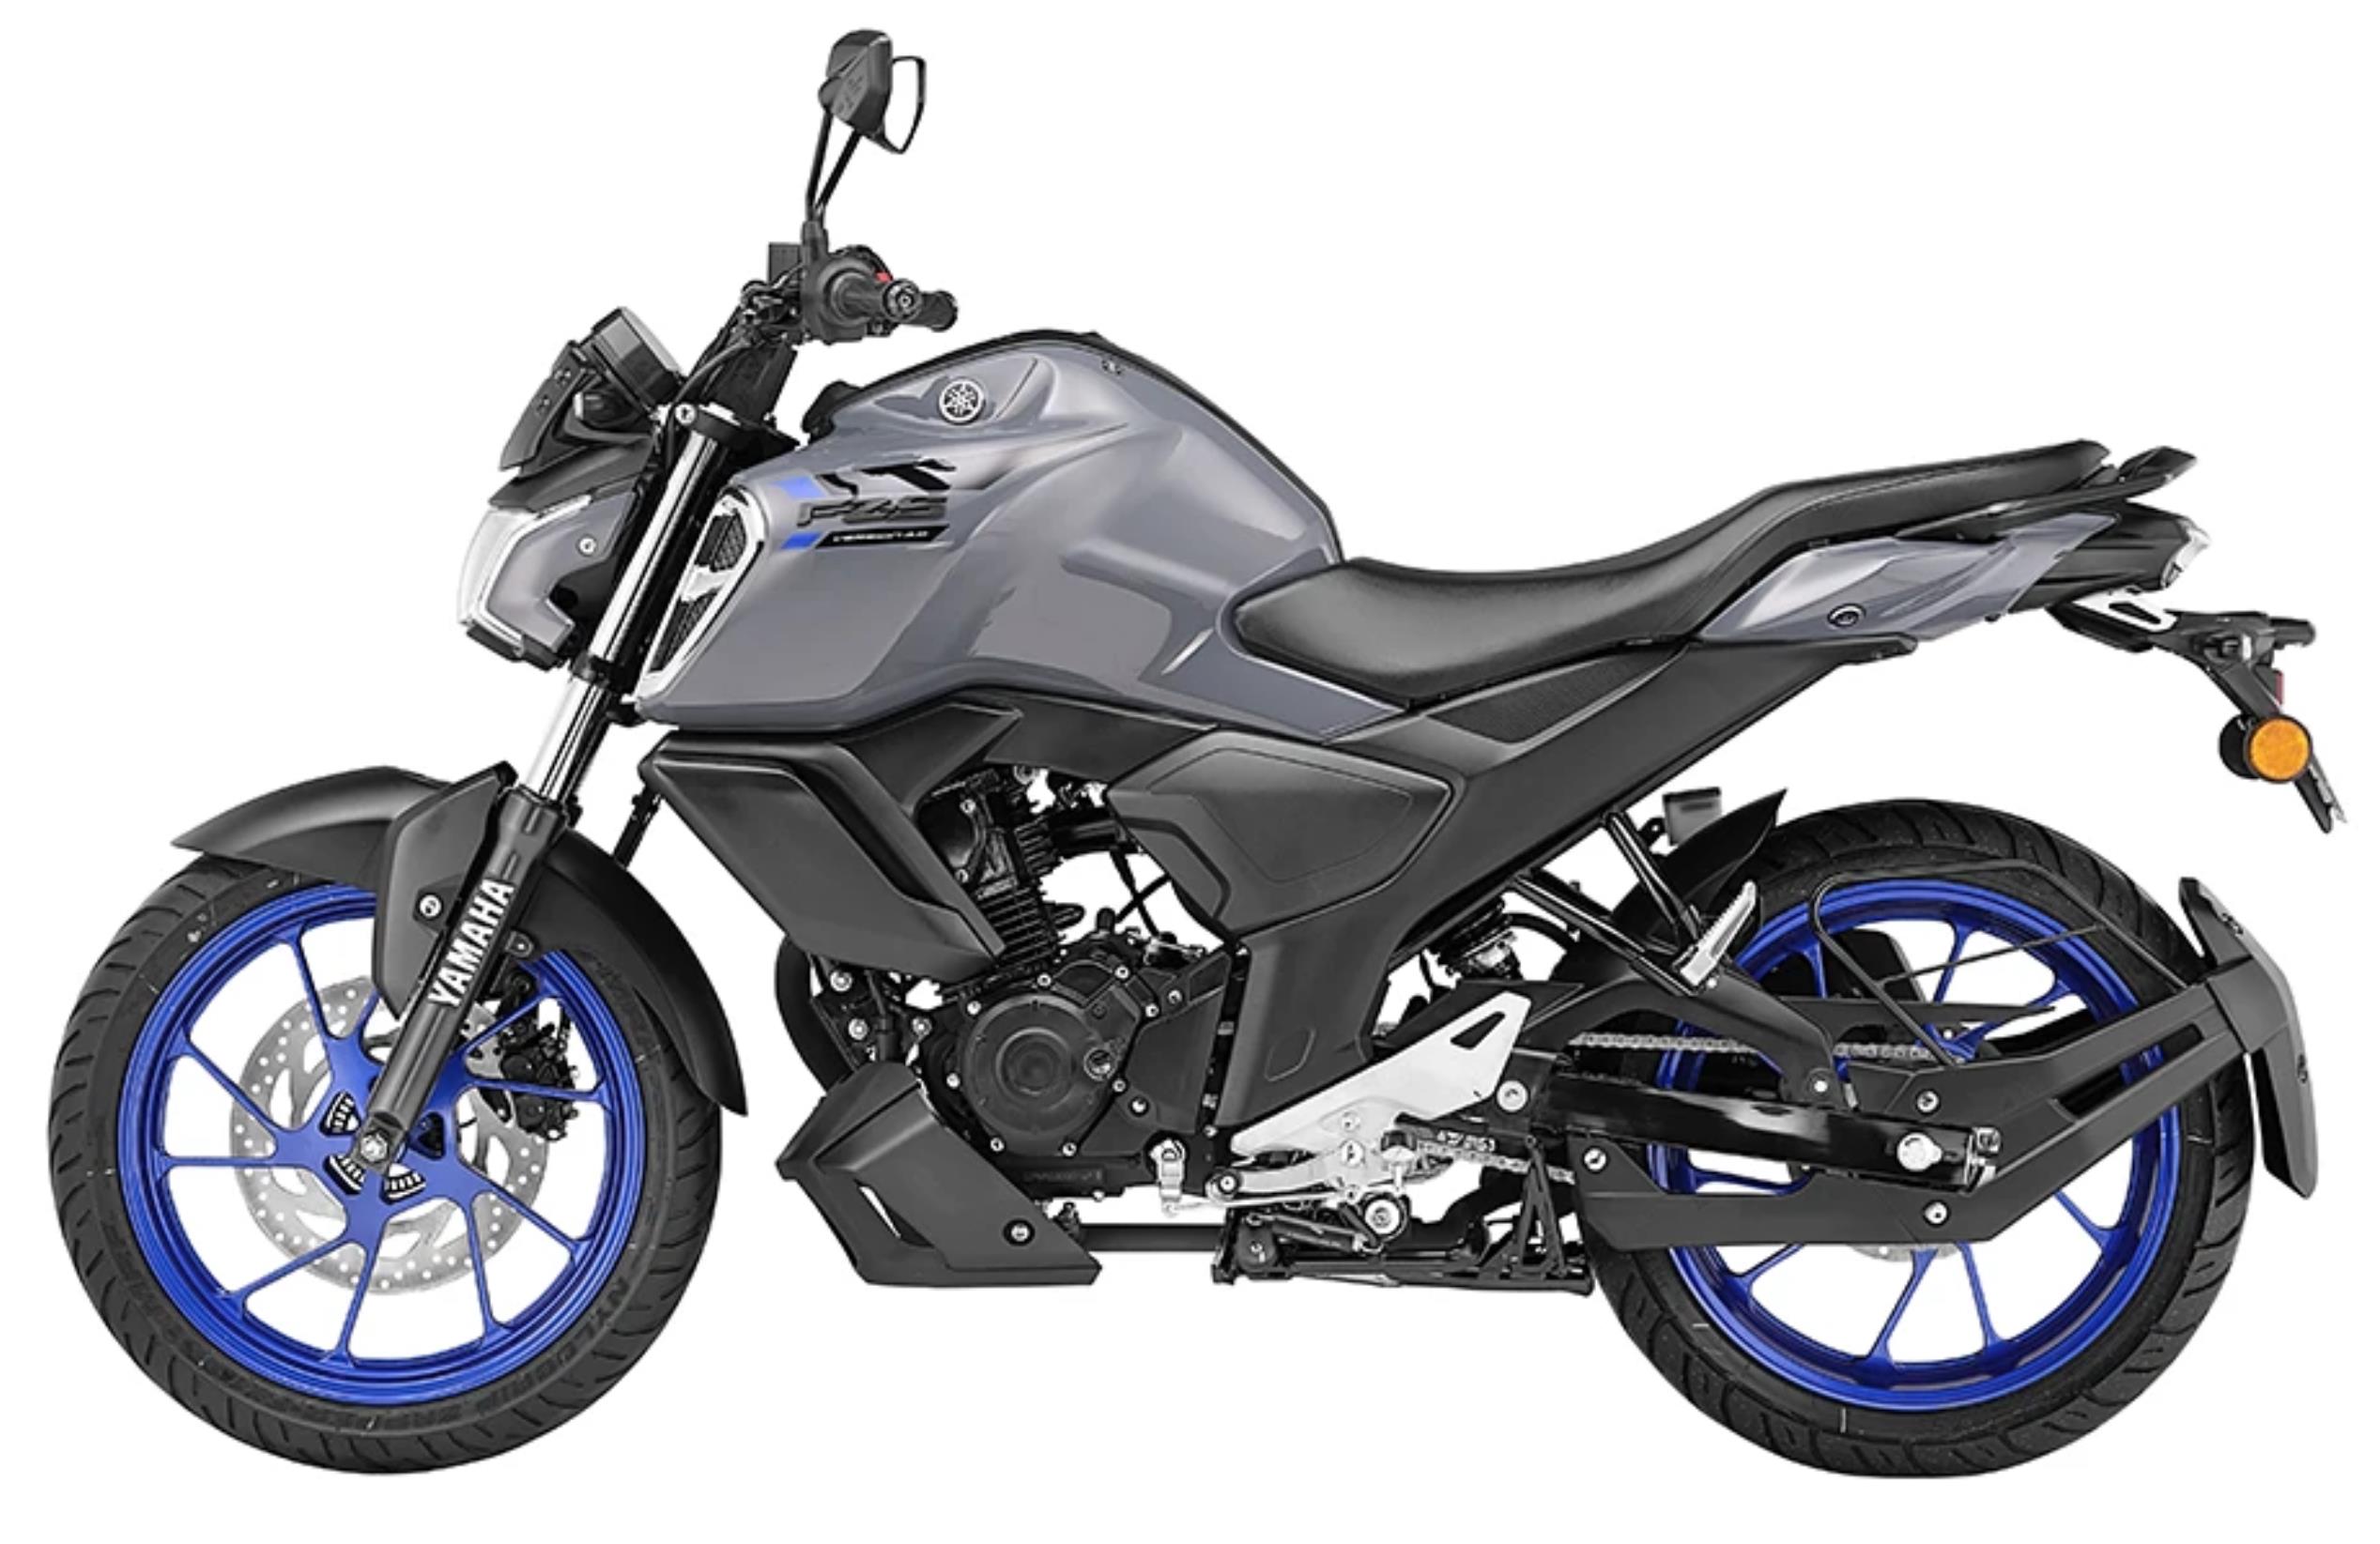 Yamaha FZS V4 Deluxe Price, Specs, Top Speed & Mileage in India (New Model)